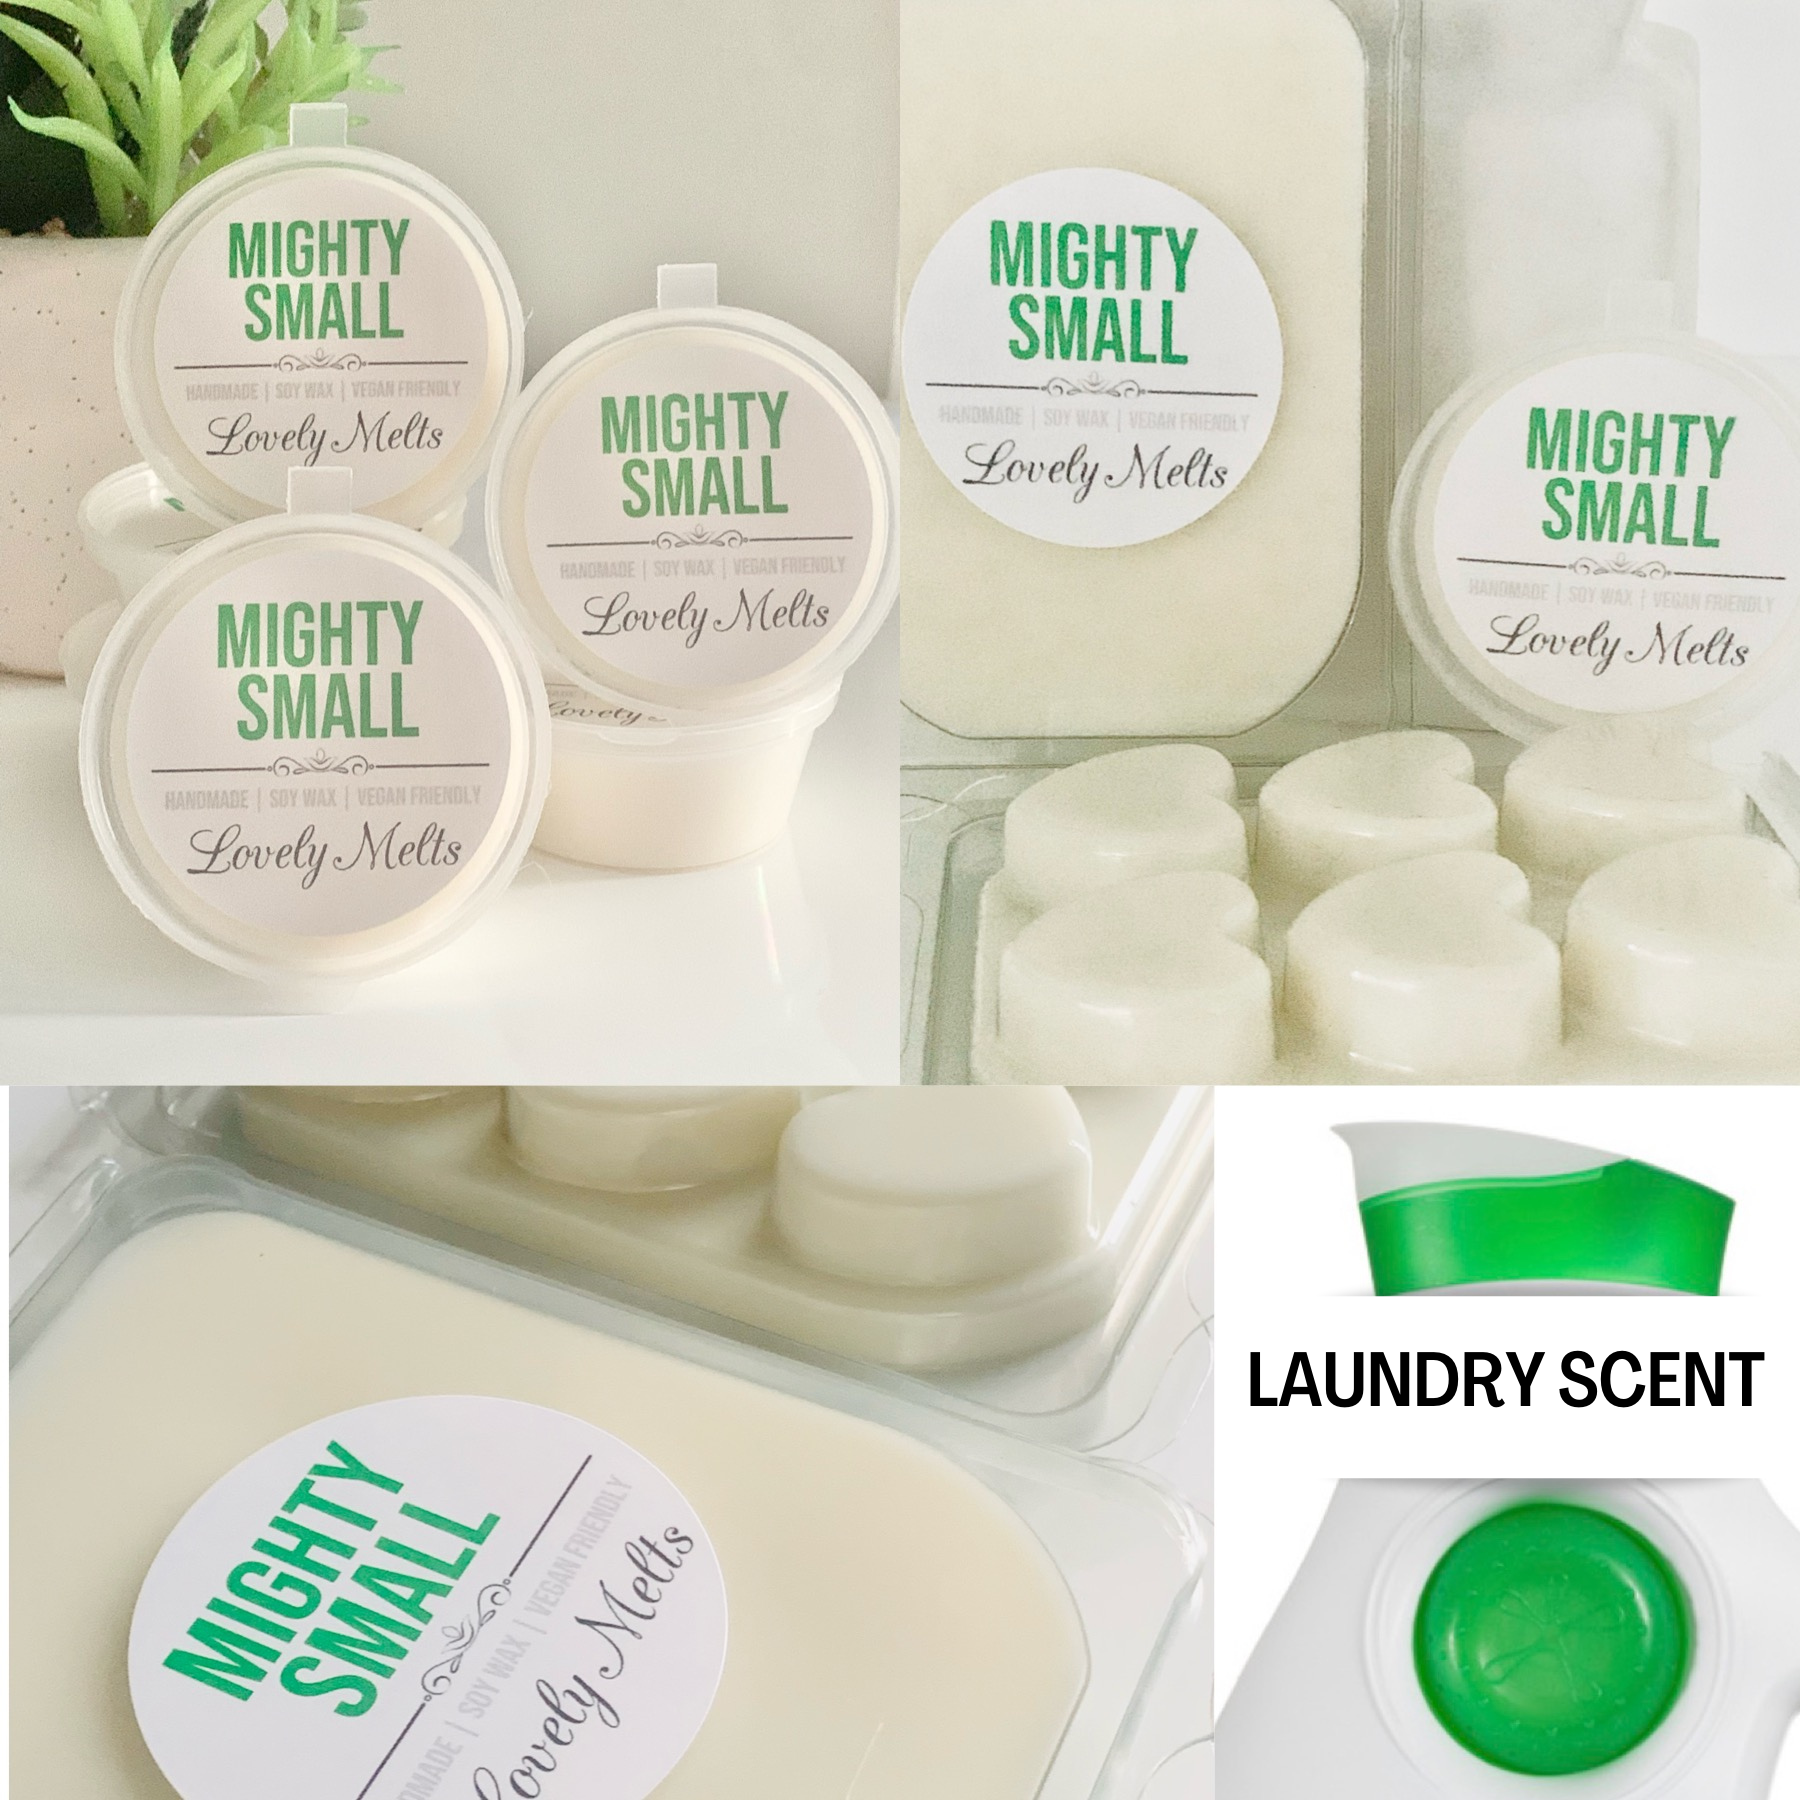 small and mighty wax melts